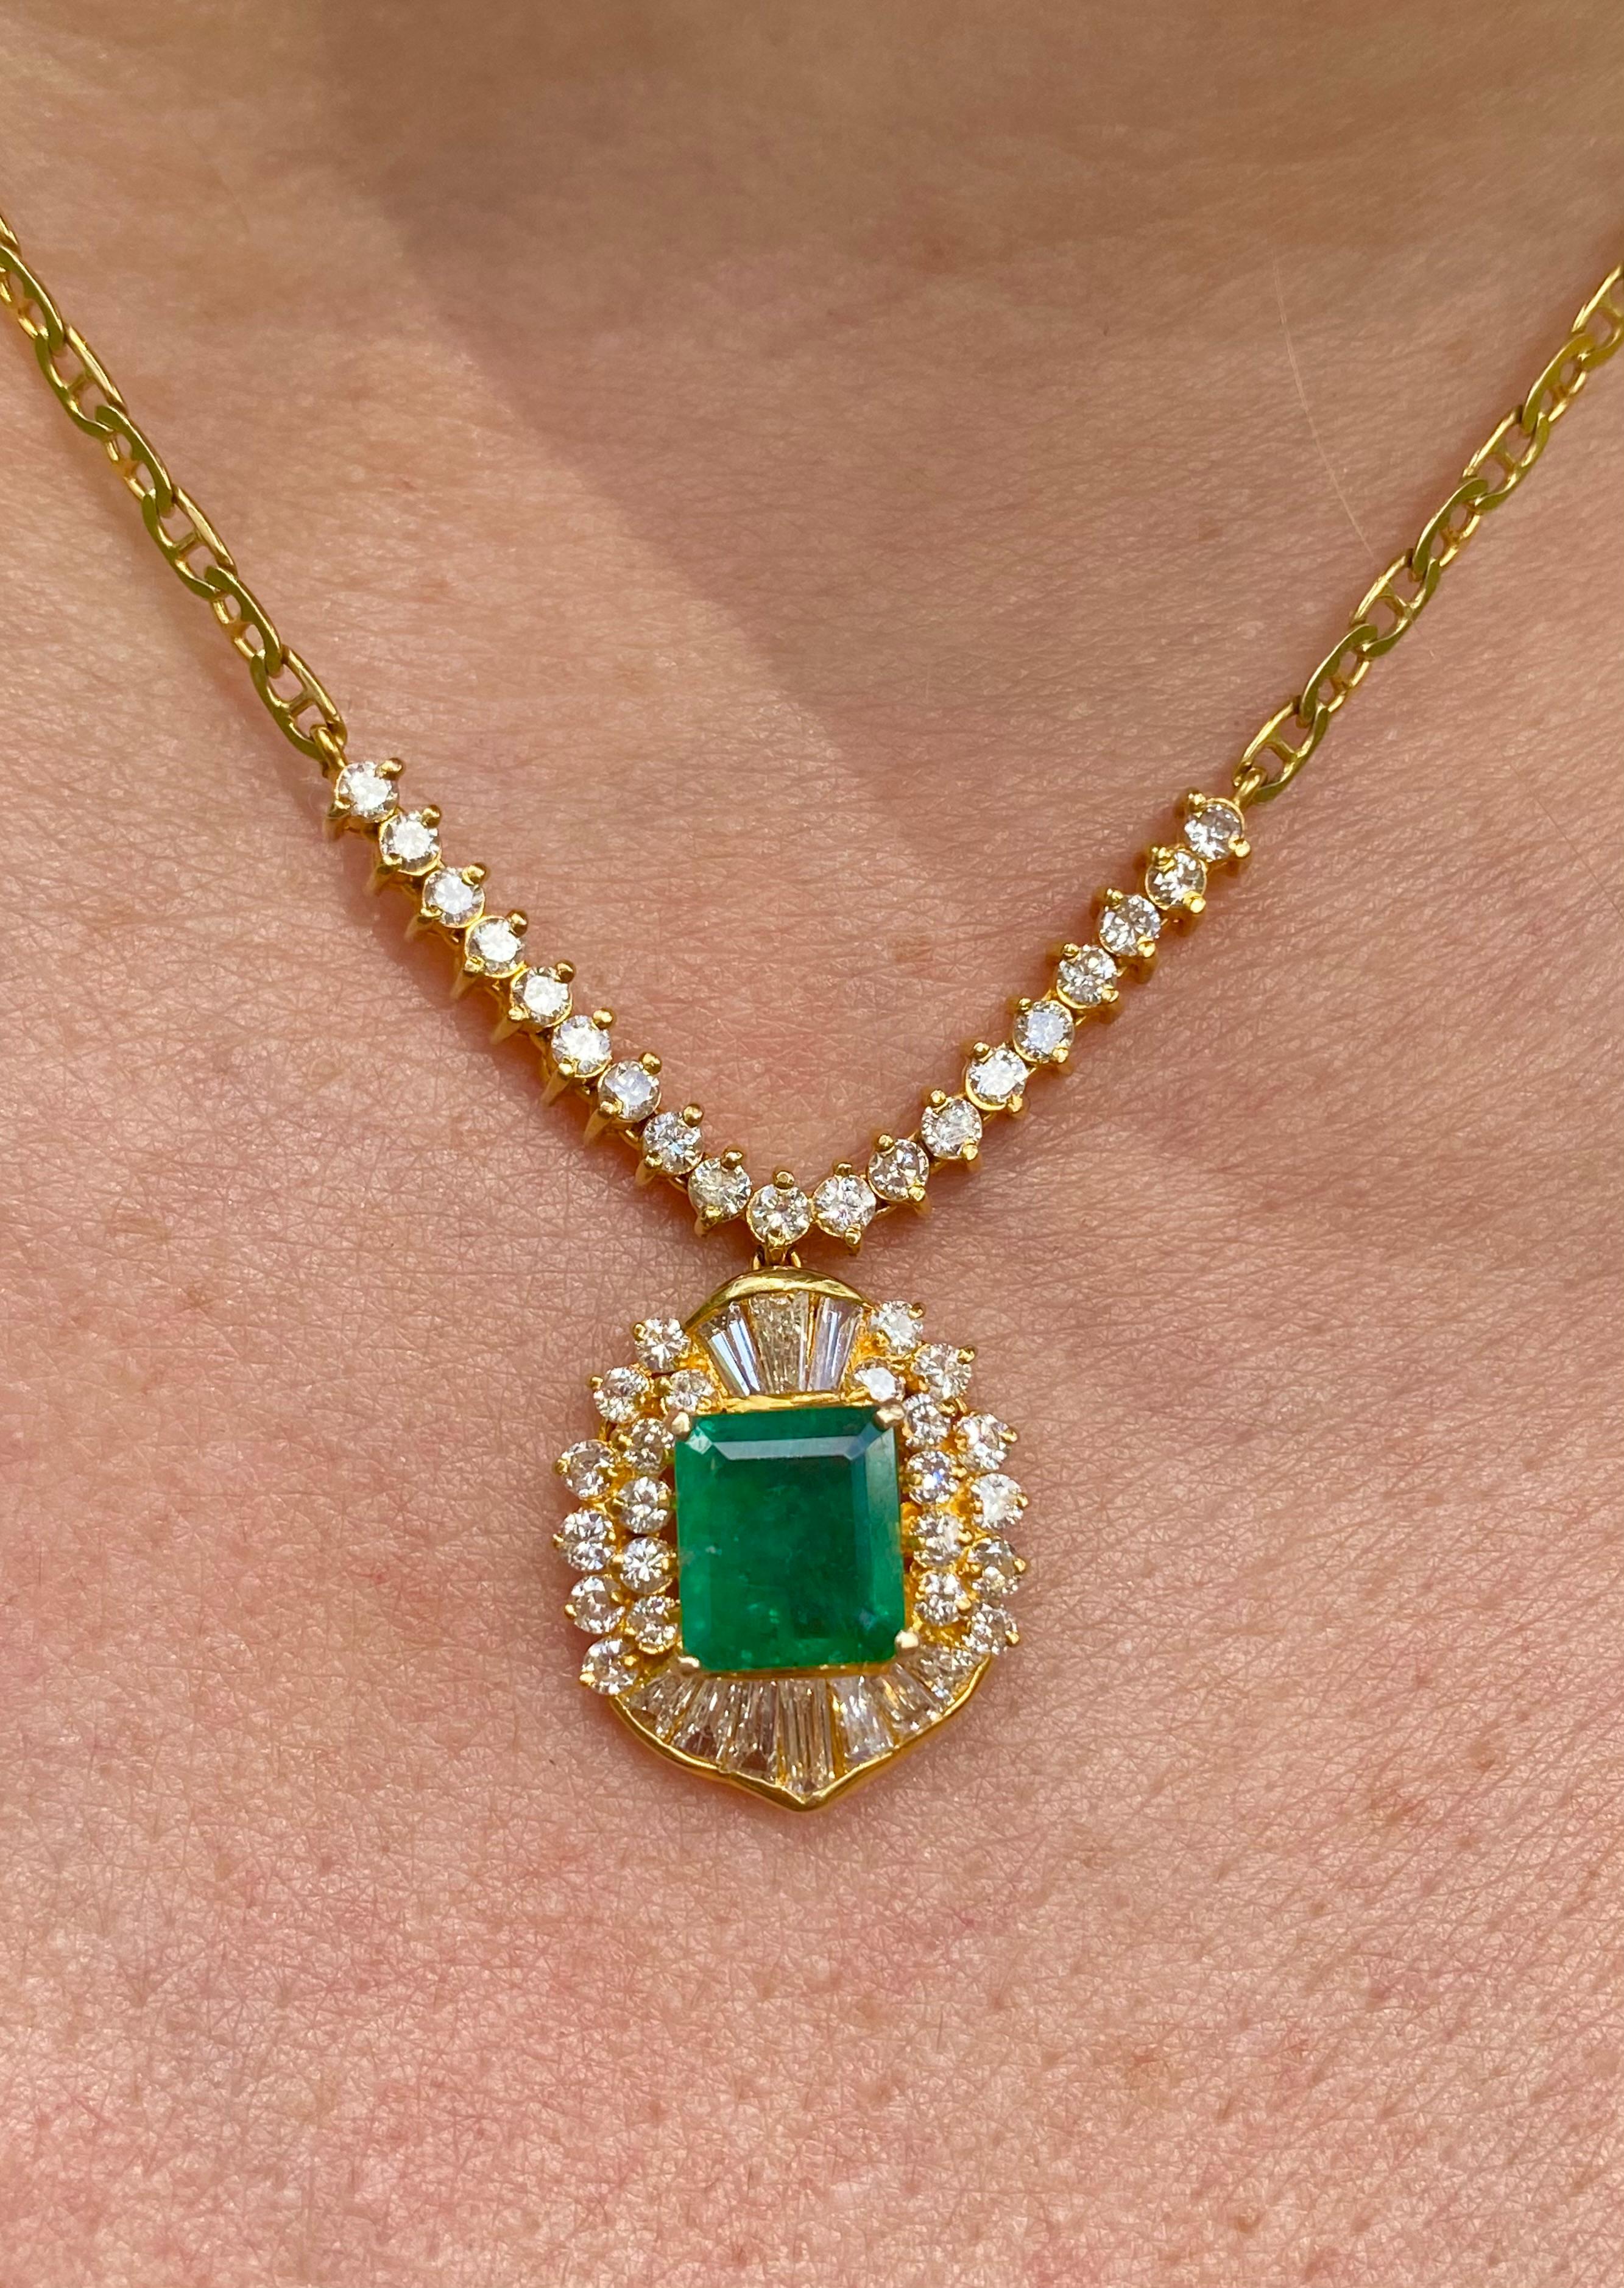 7.41 Carat Colombian Emerald and Diamond Pendant, Earring and Ring 18K Gold Set For Sale 10